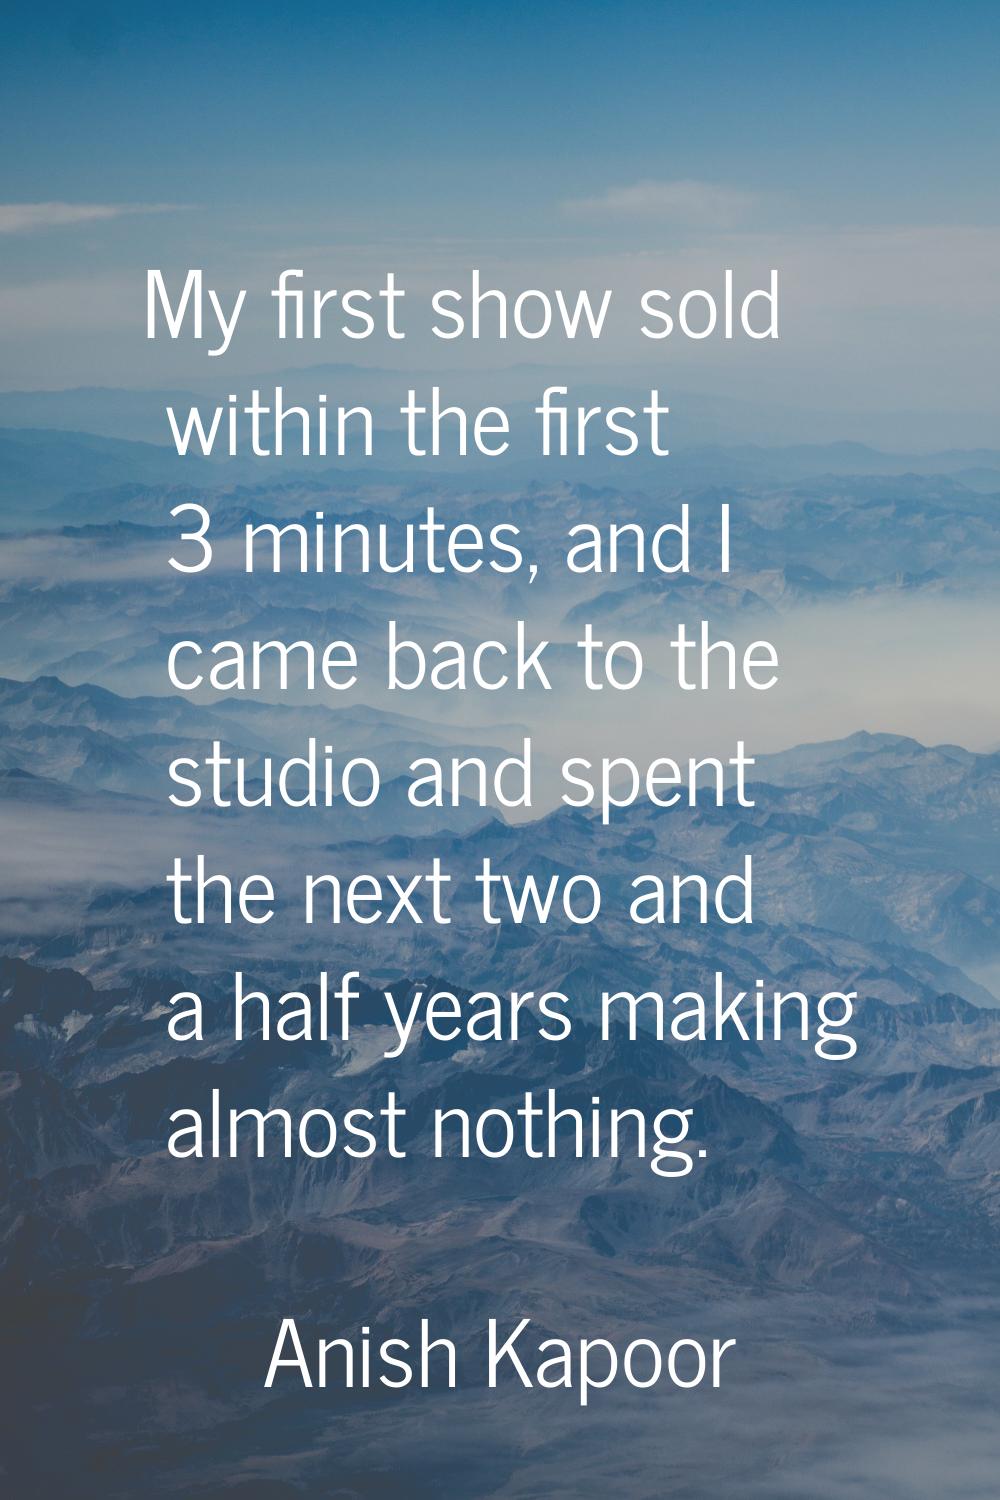 My first show sold within the first 3 minutes, and I came back to the studio and spent the next two